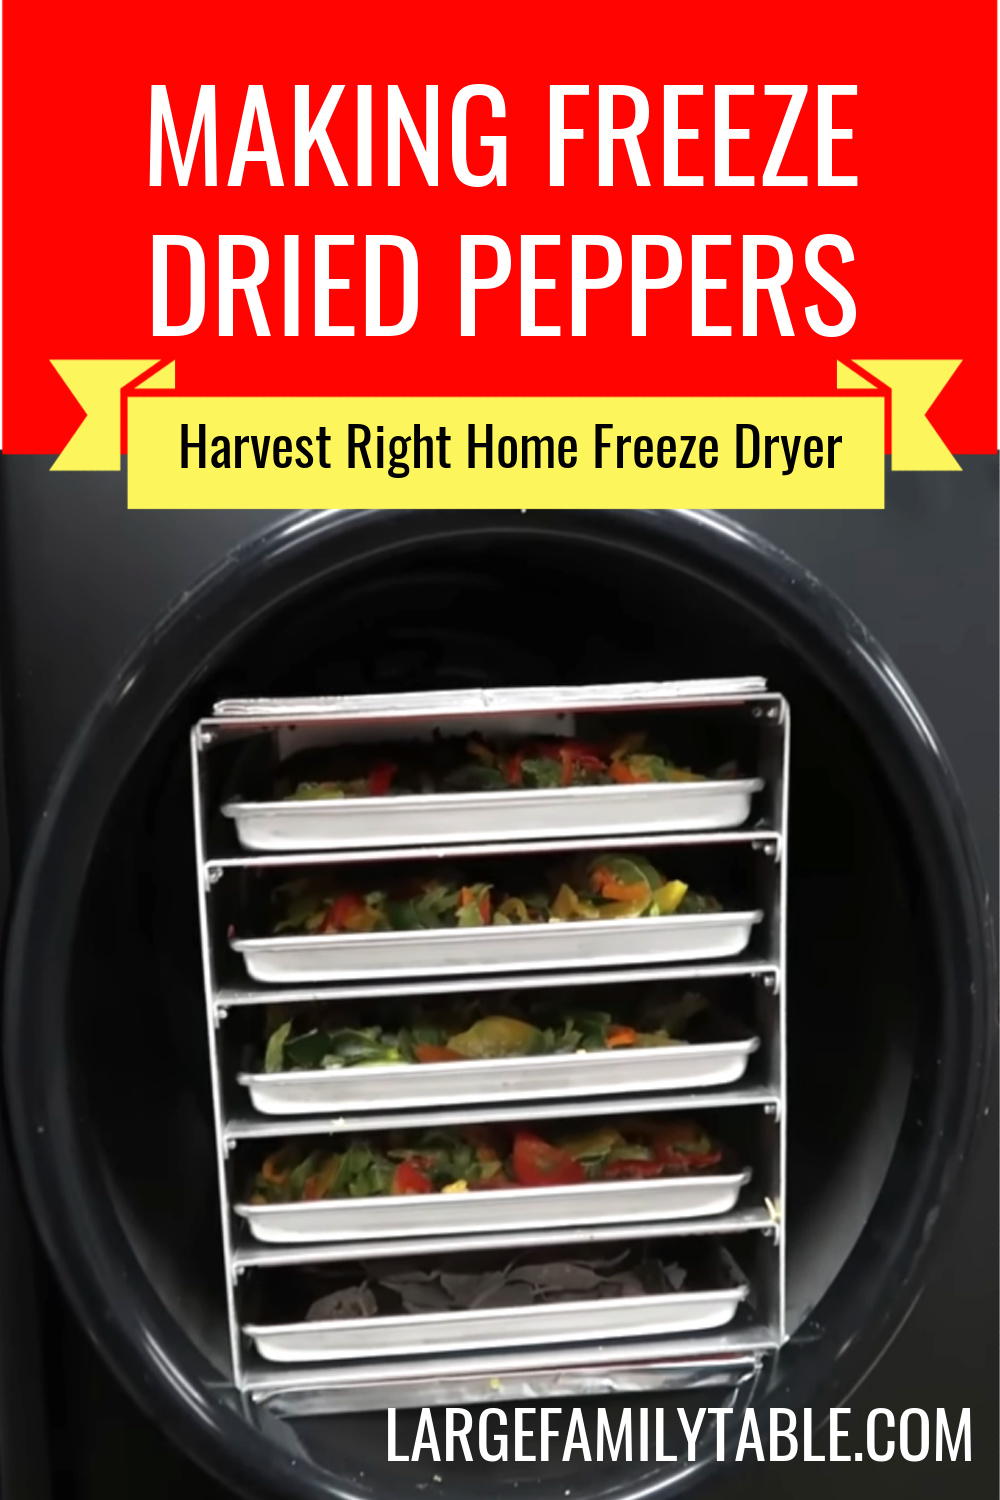 Freeze Dryer with Peppers inside